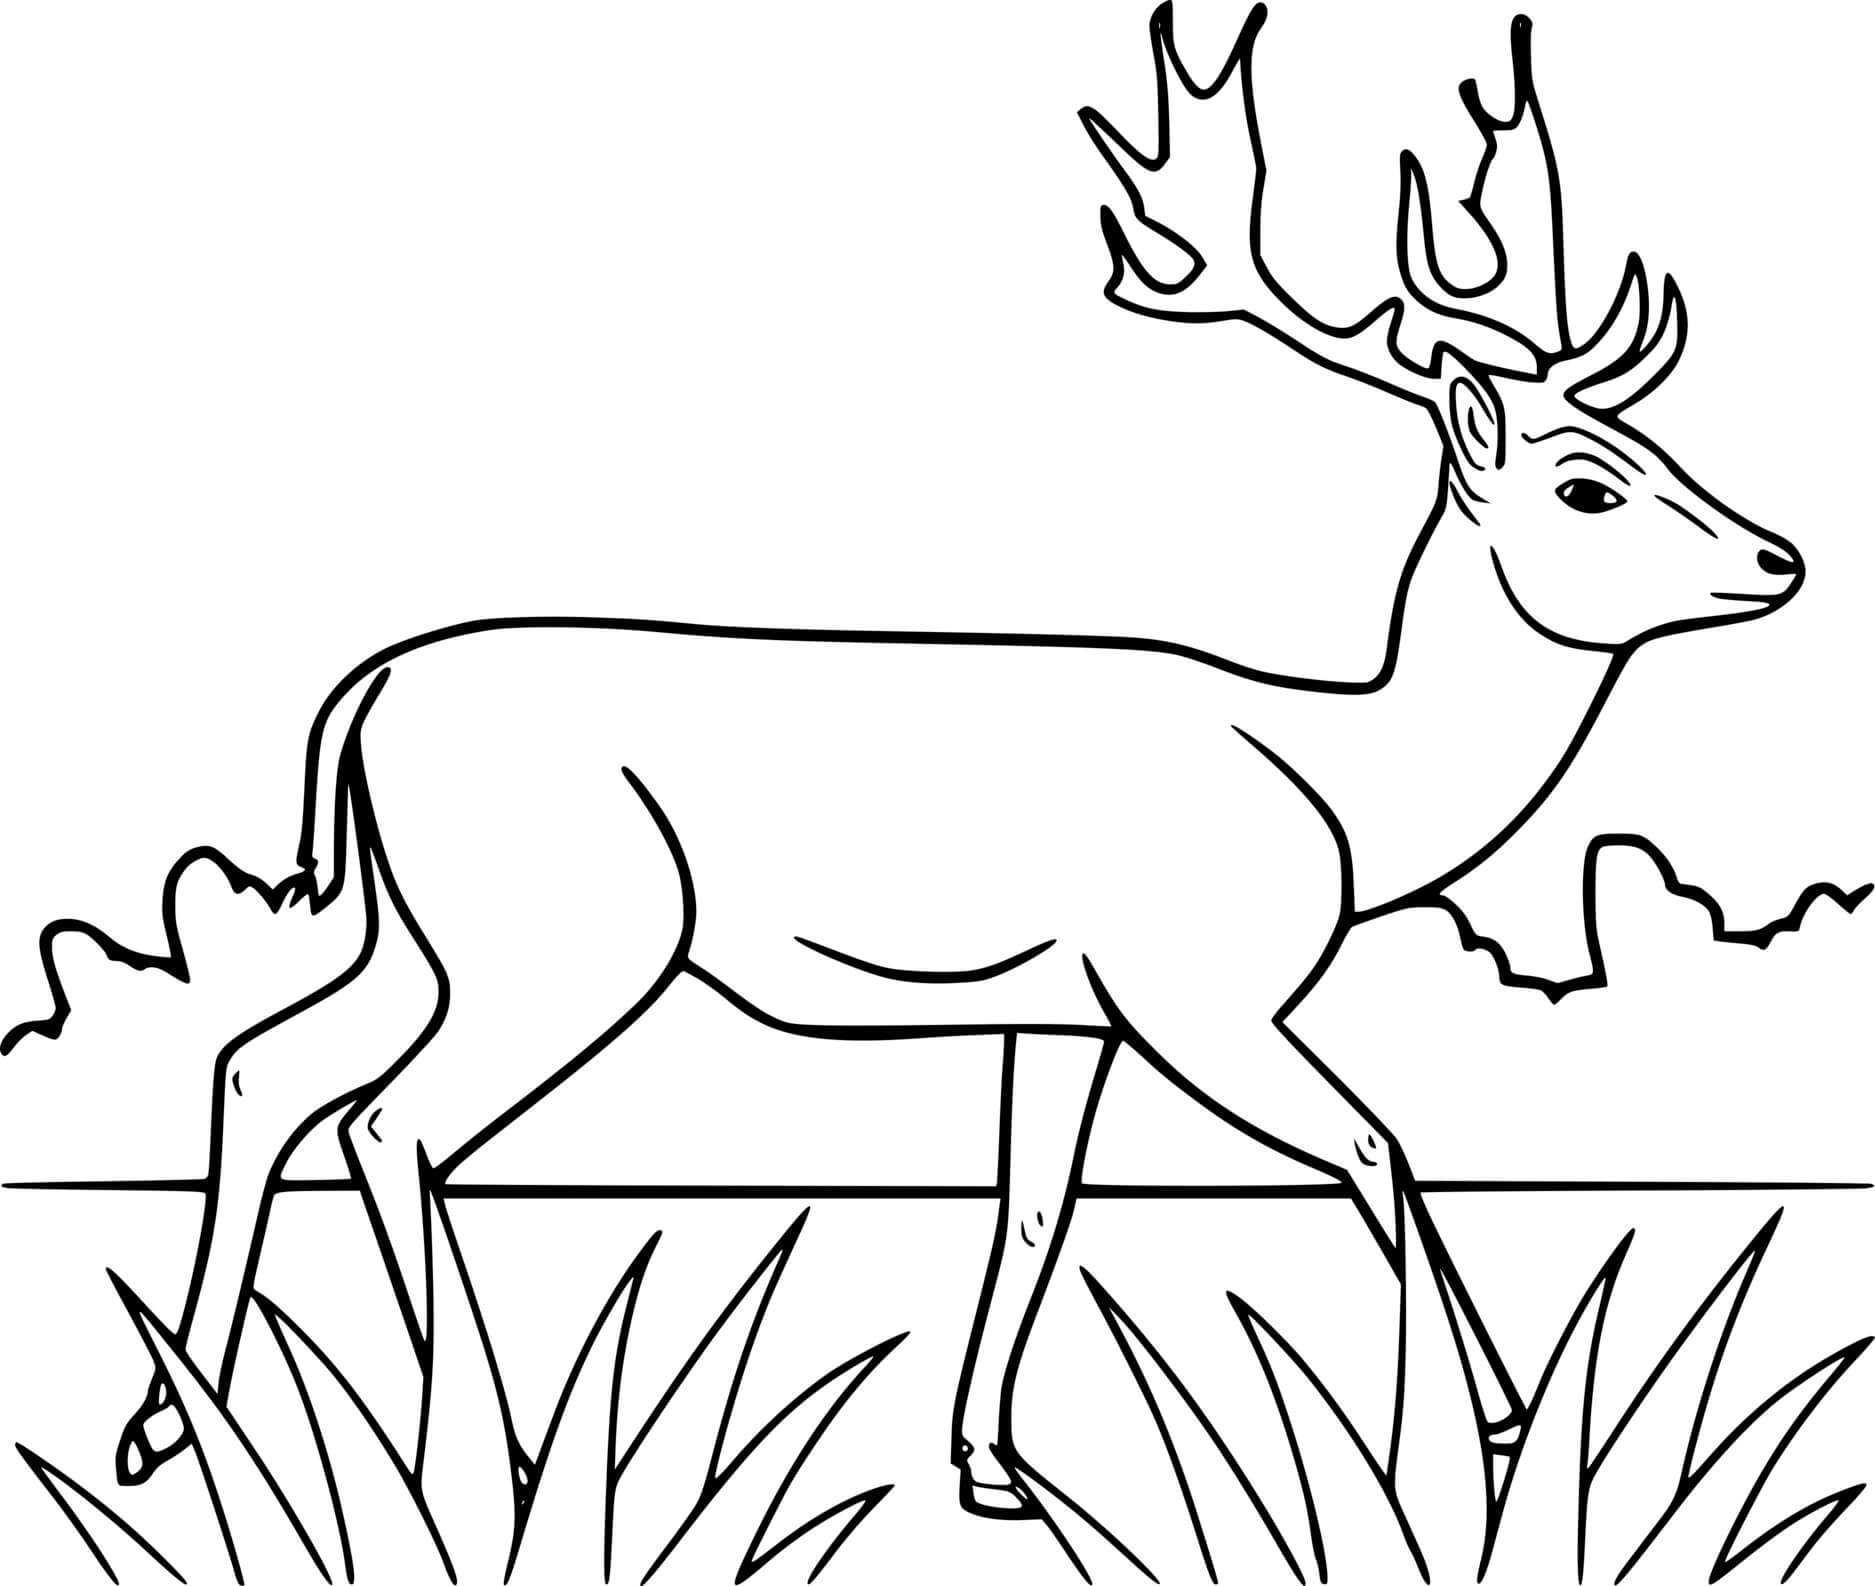 Deer Walking On The Grass Coloring Page